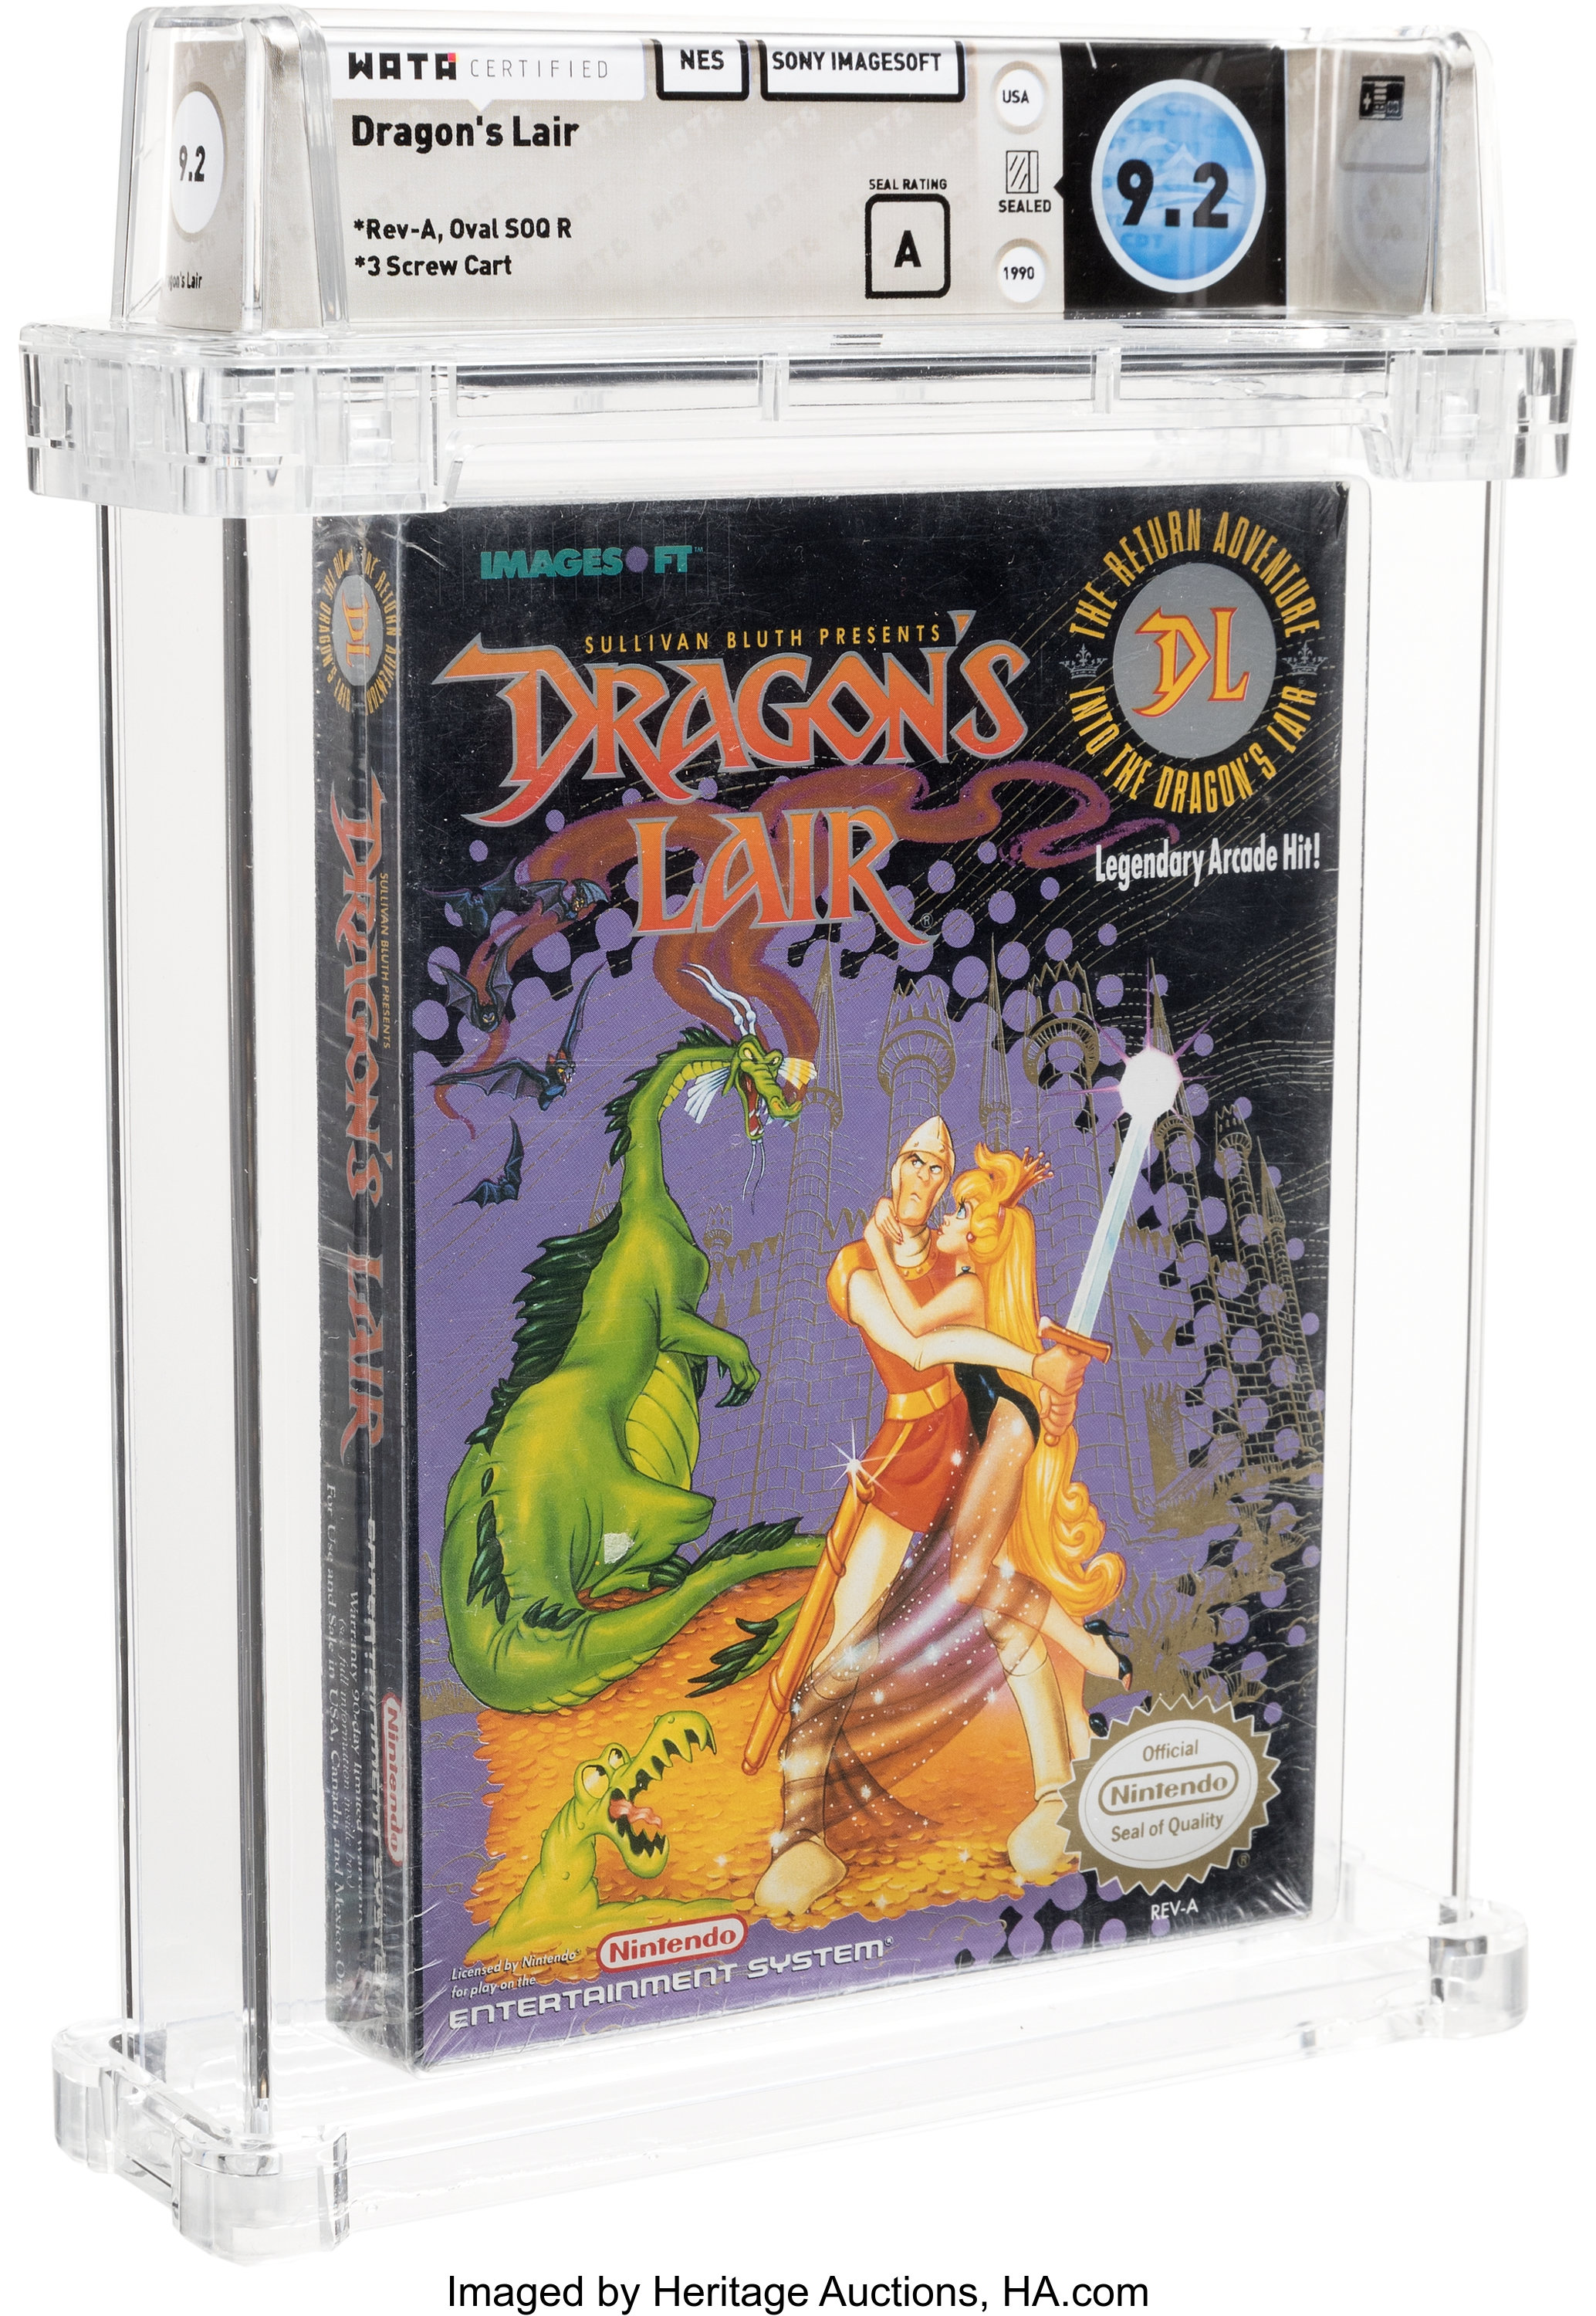 Dragon S Lair Wata 9 2 A Sealed Nes Sony Imagesoft 1990 Usa Lot Heritage Auctions